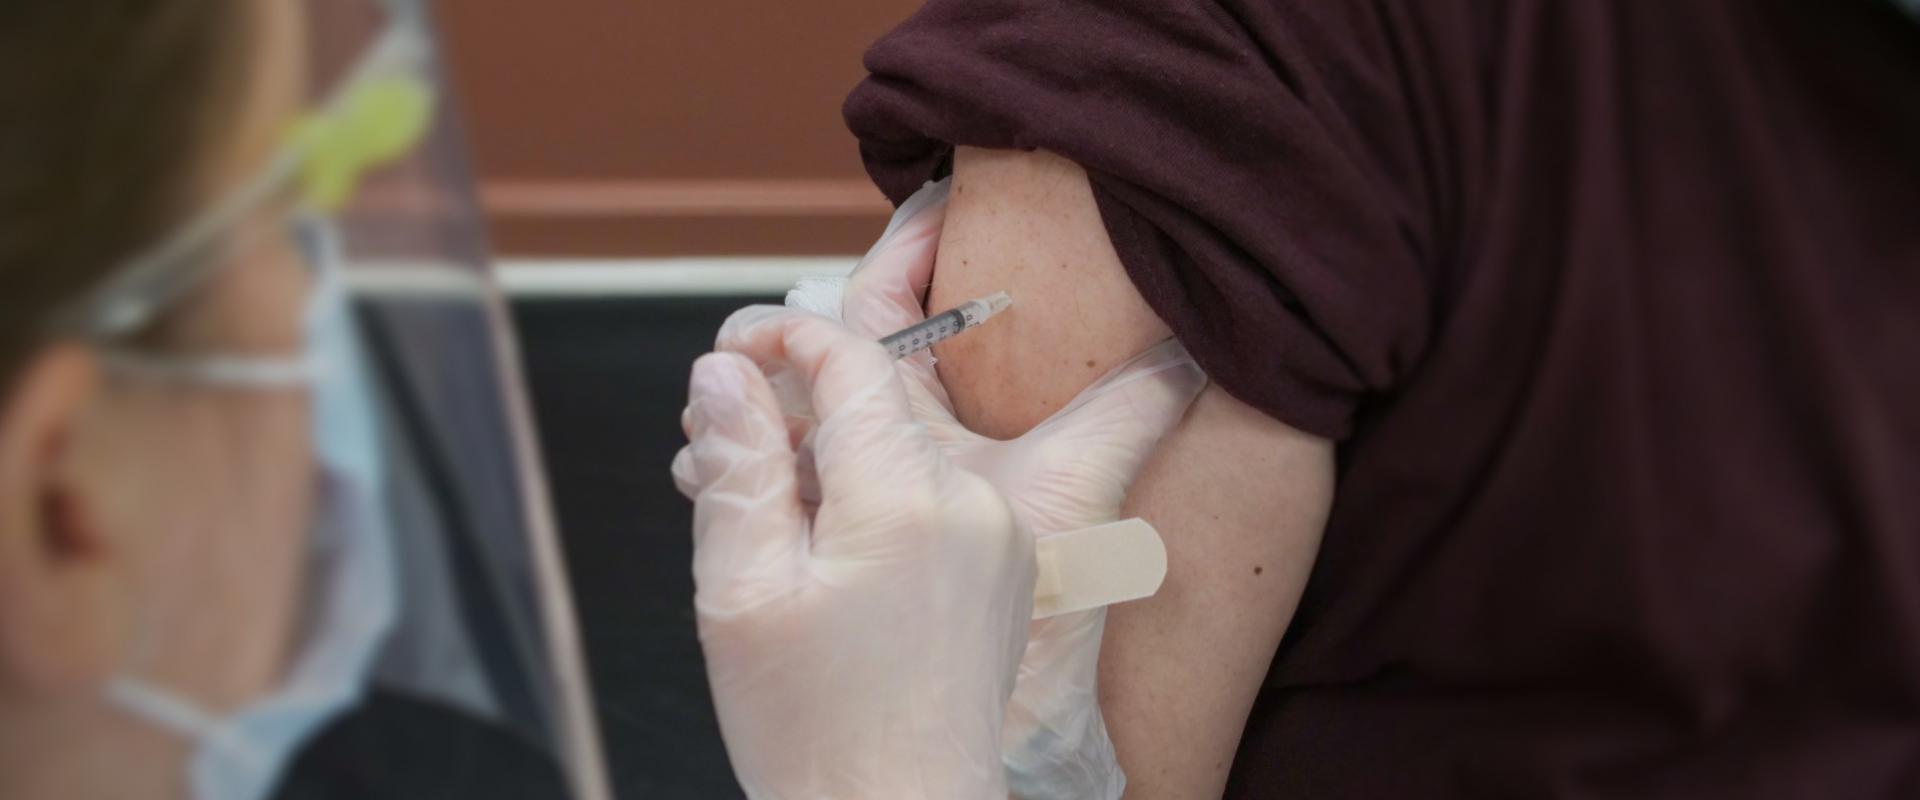 Medical staff injecting persons arm